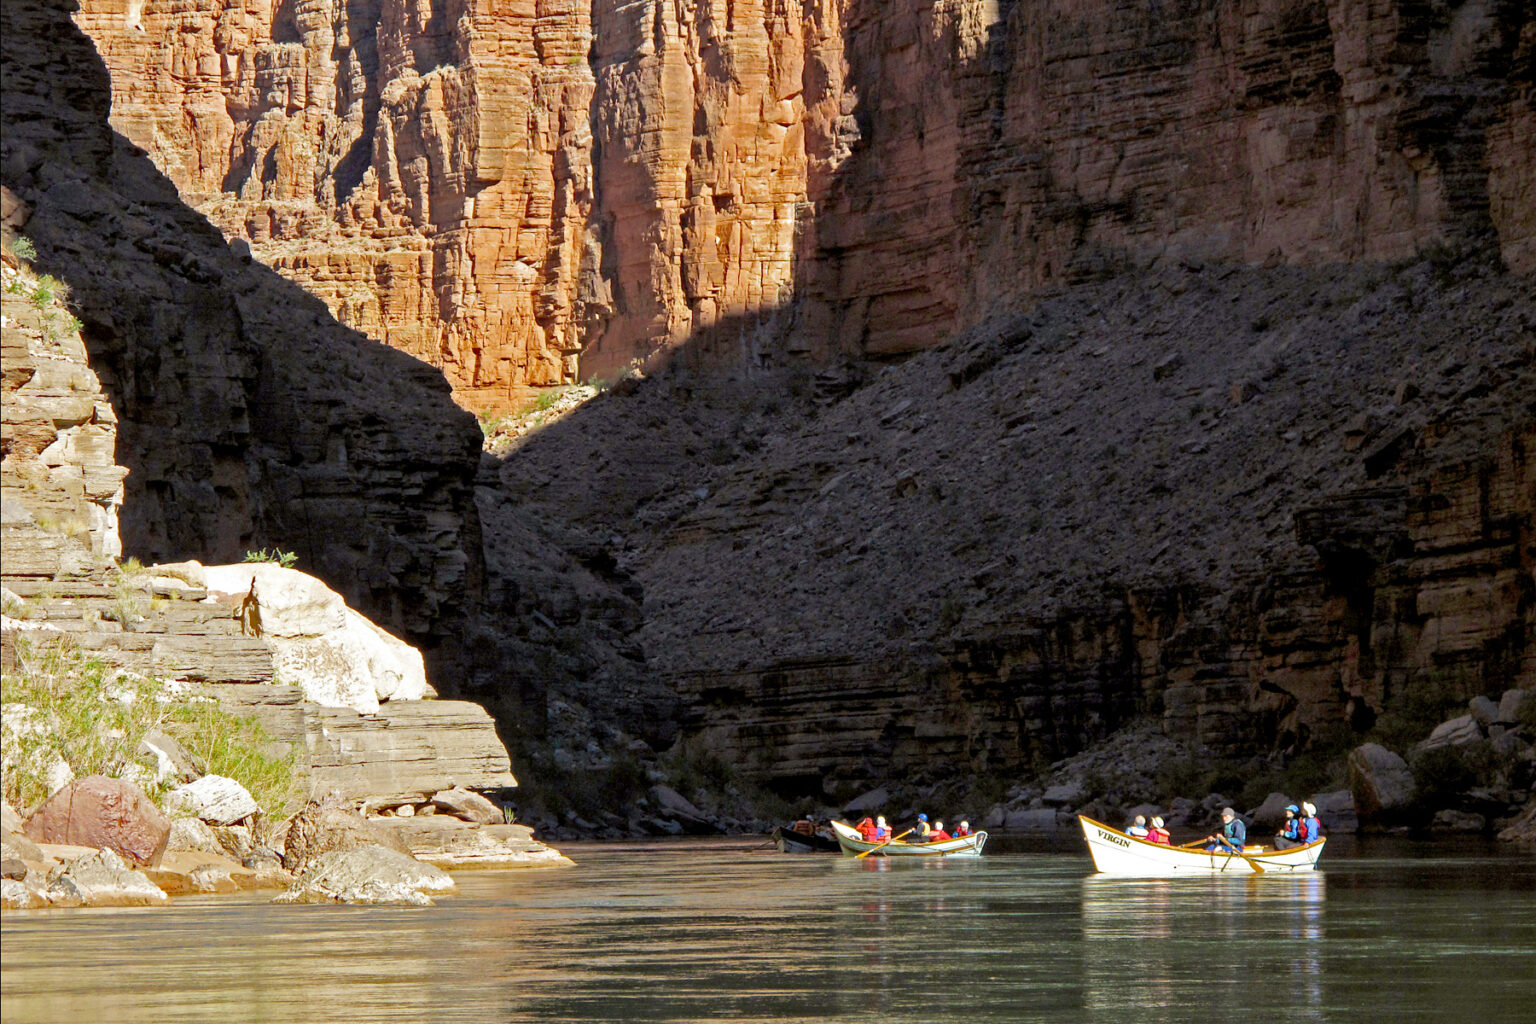 OARS dories are lit by sunlight against the cliffs in shadow deep in Grand Canyon